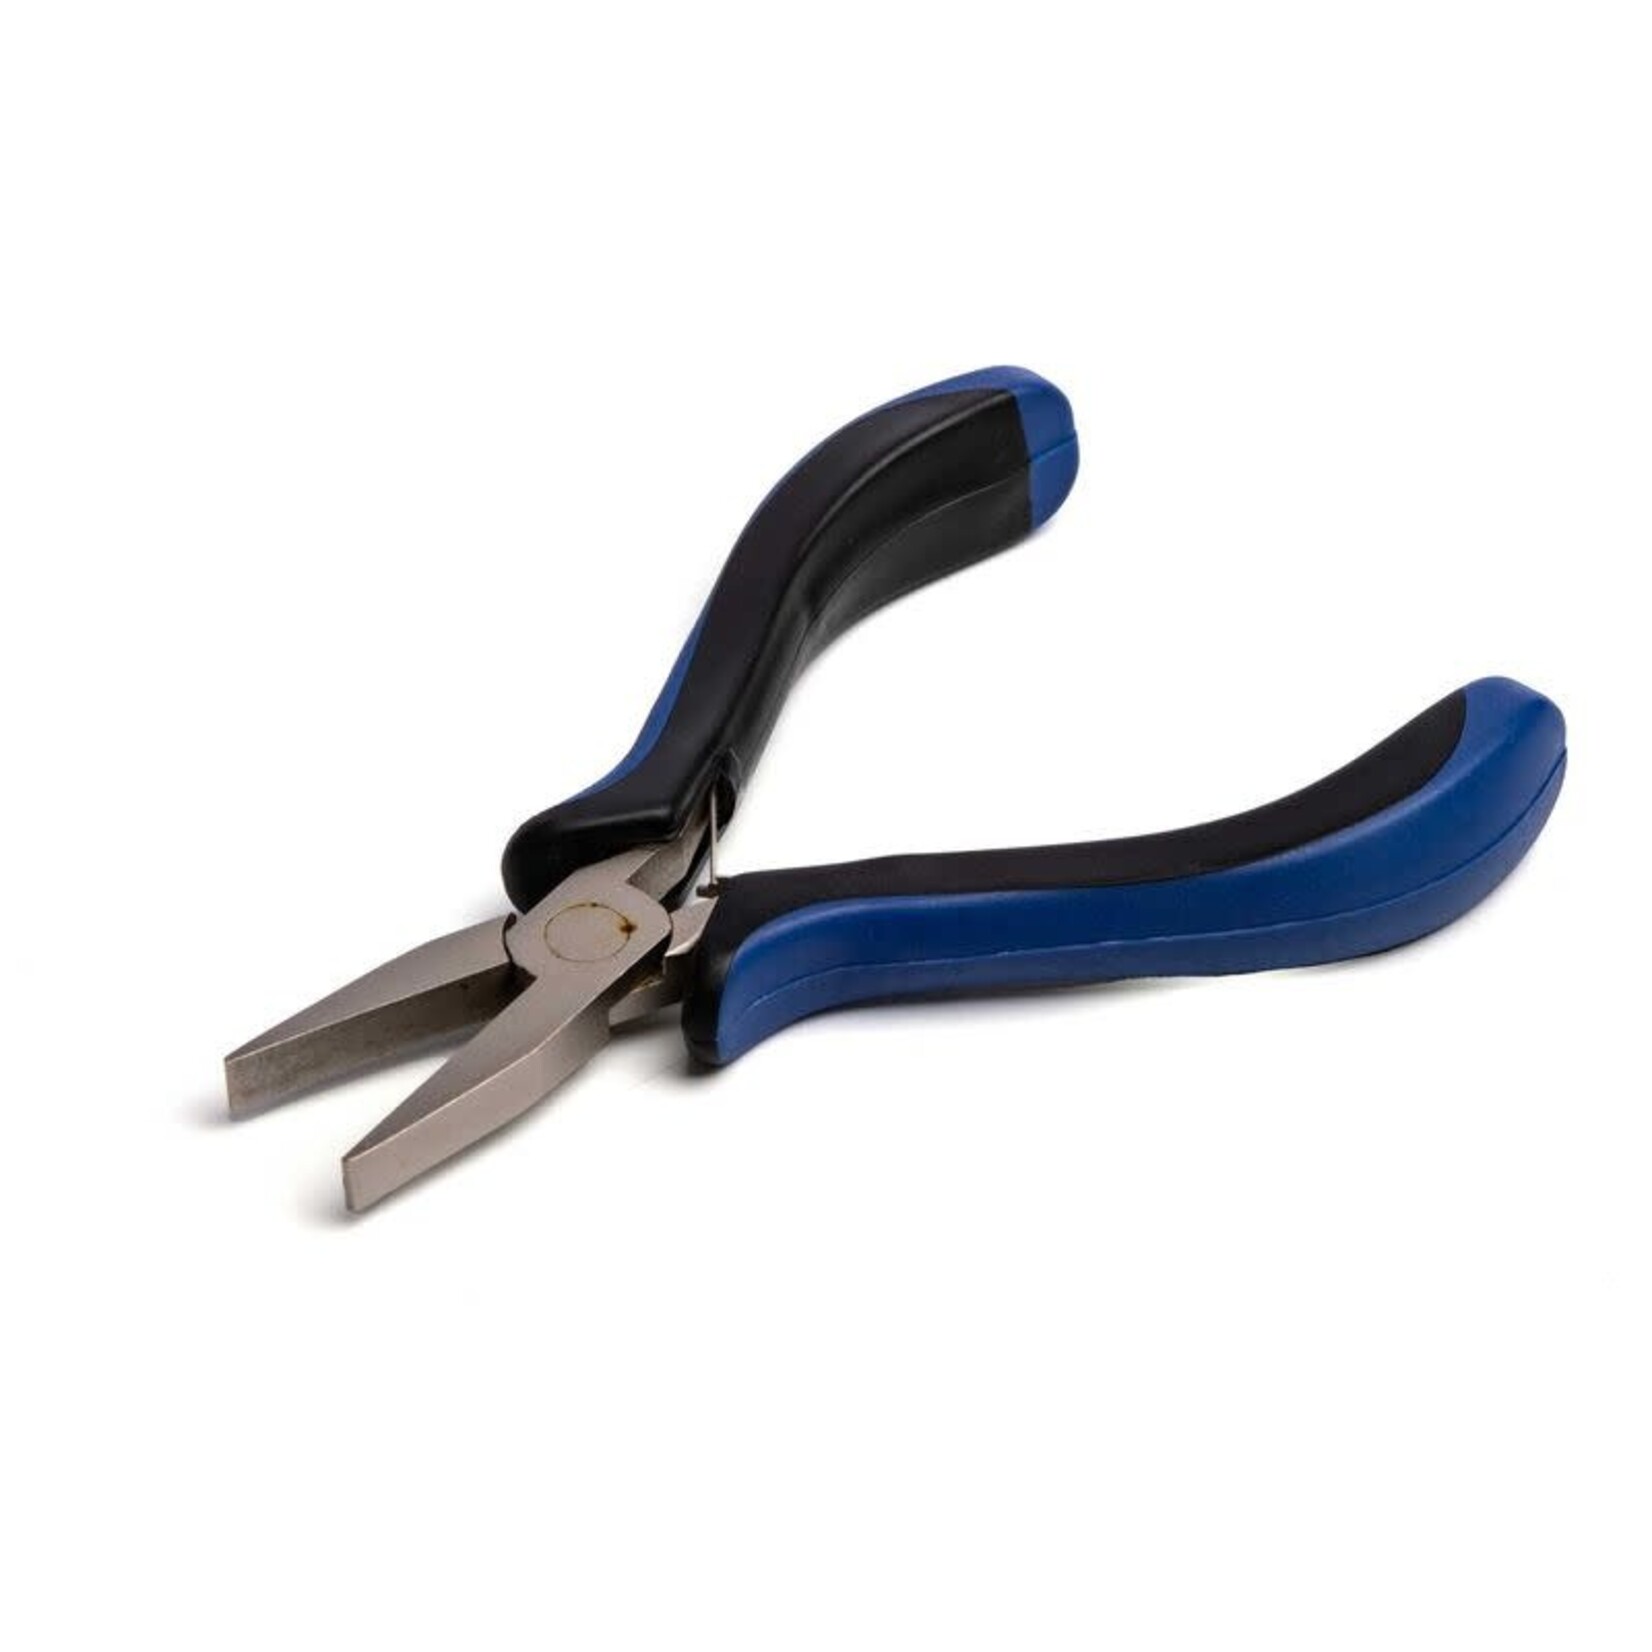 Hobby Essentials HDXK0019 Hobby Essentials PLIERS SPRING LOADED FLAT NOSE